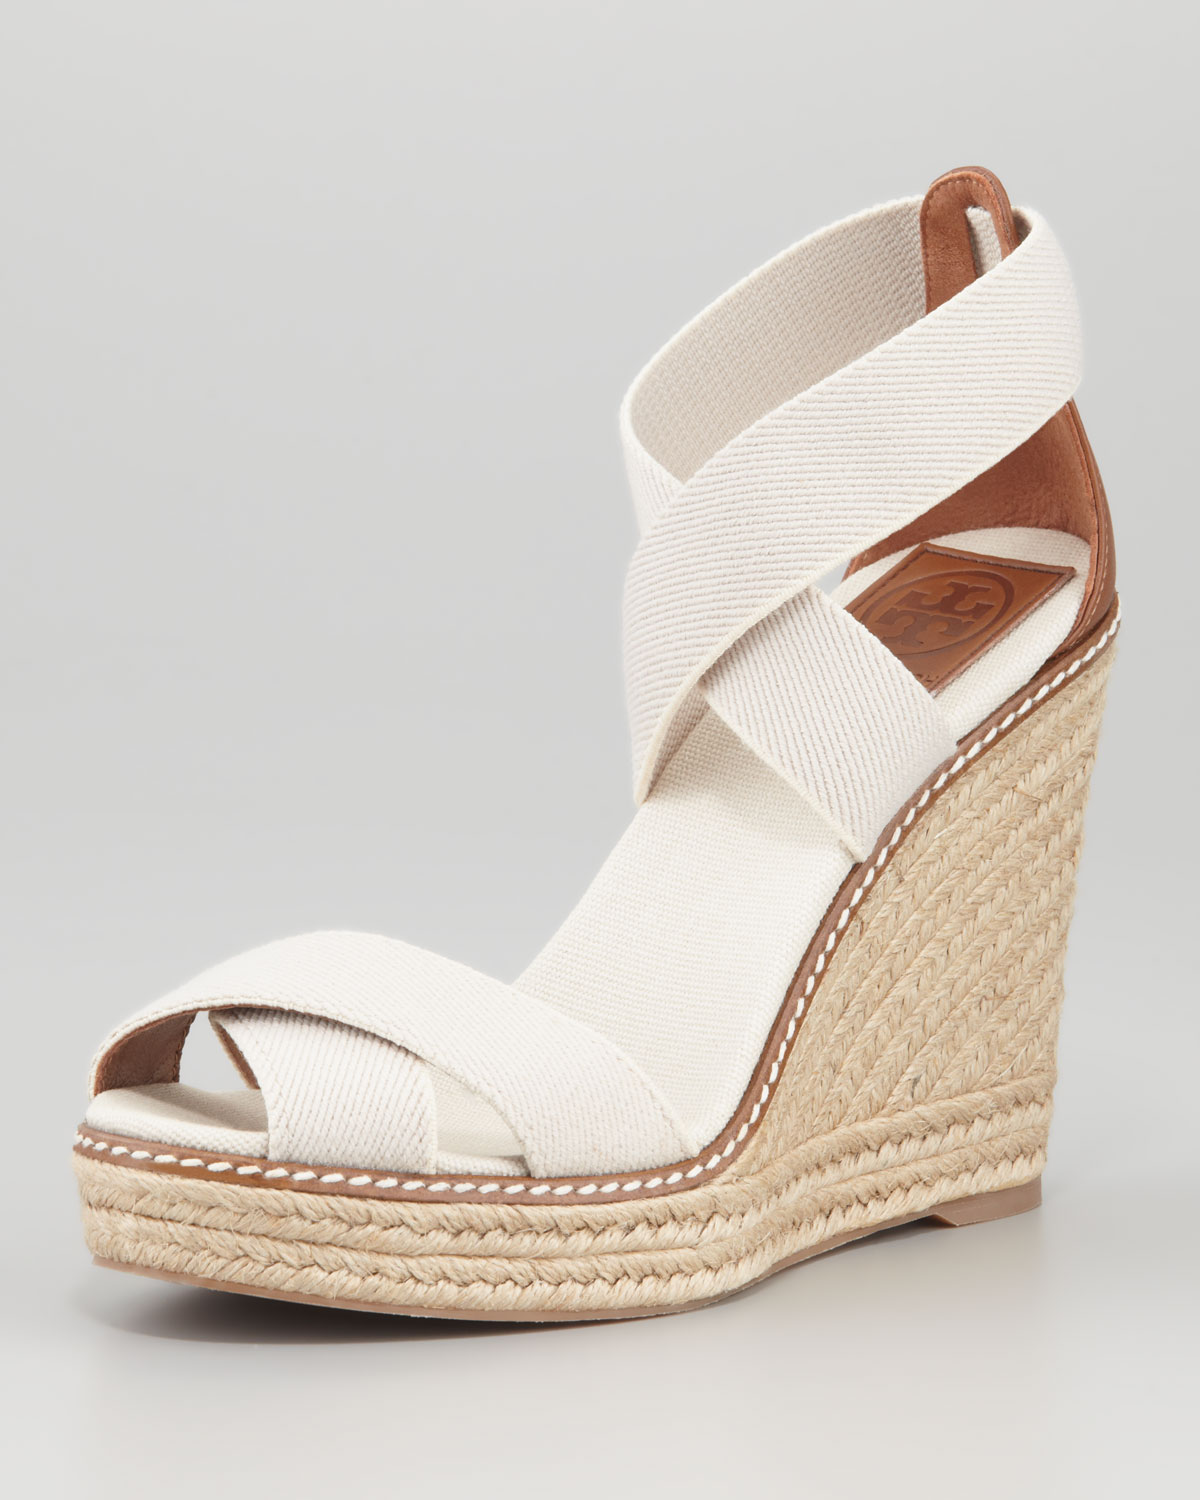 Lyst - Tory Burch Adonis Stretch Espadrille Wedge in Natural